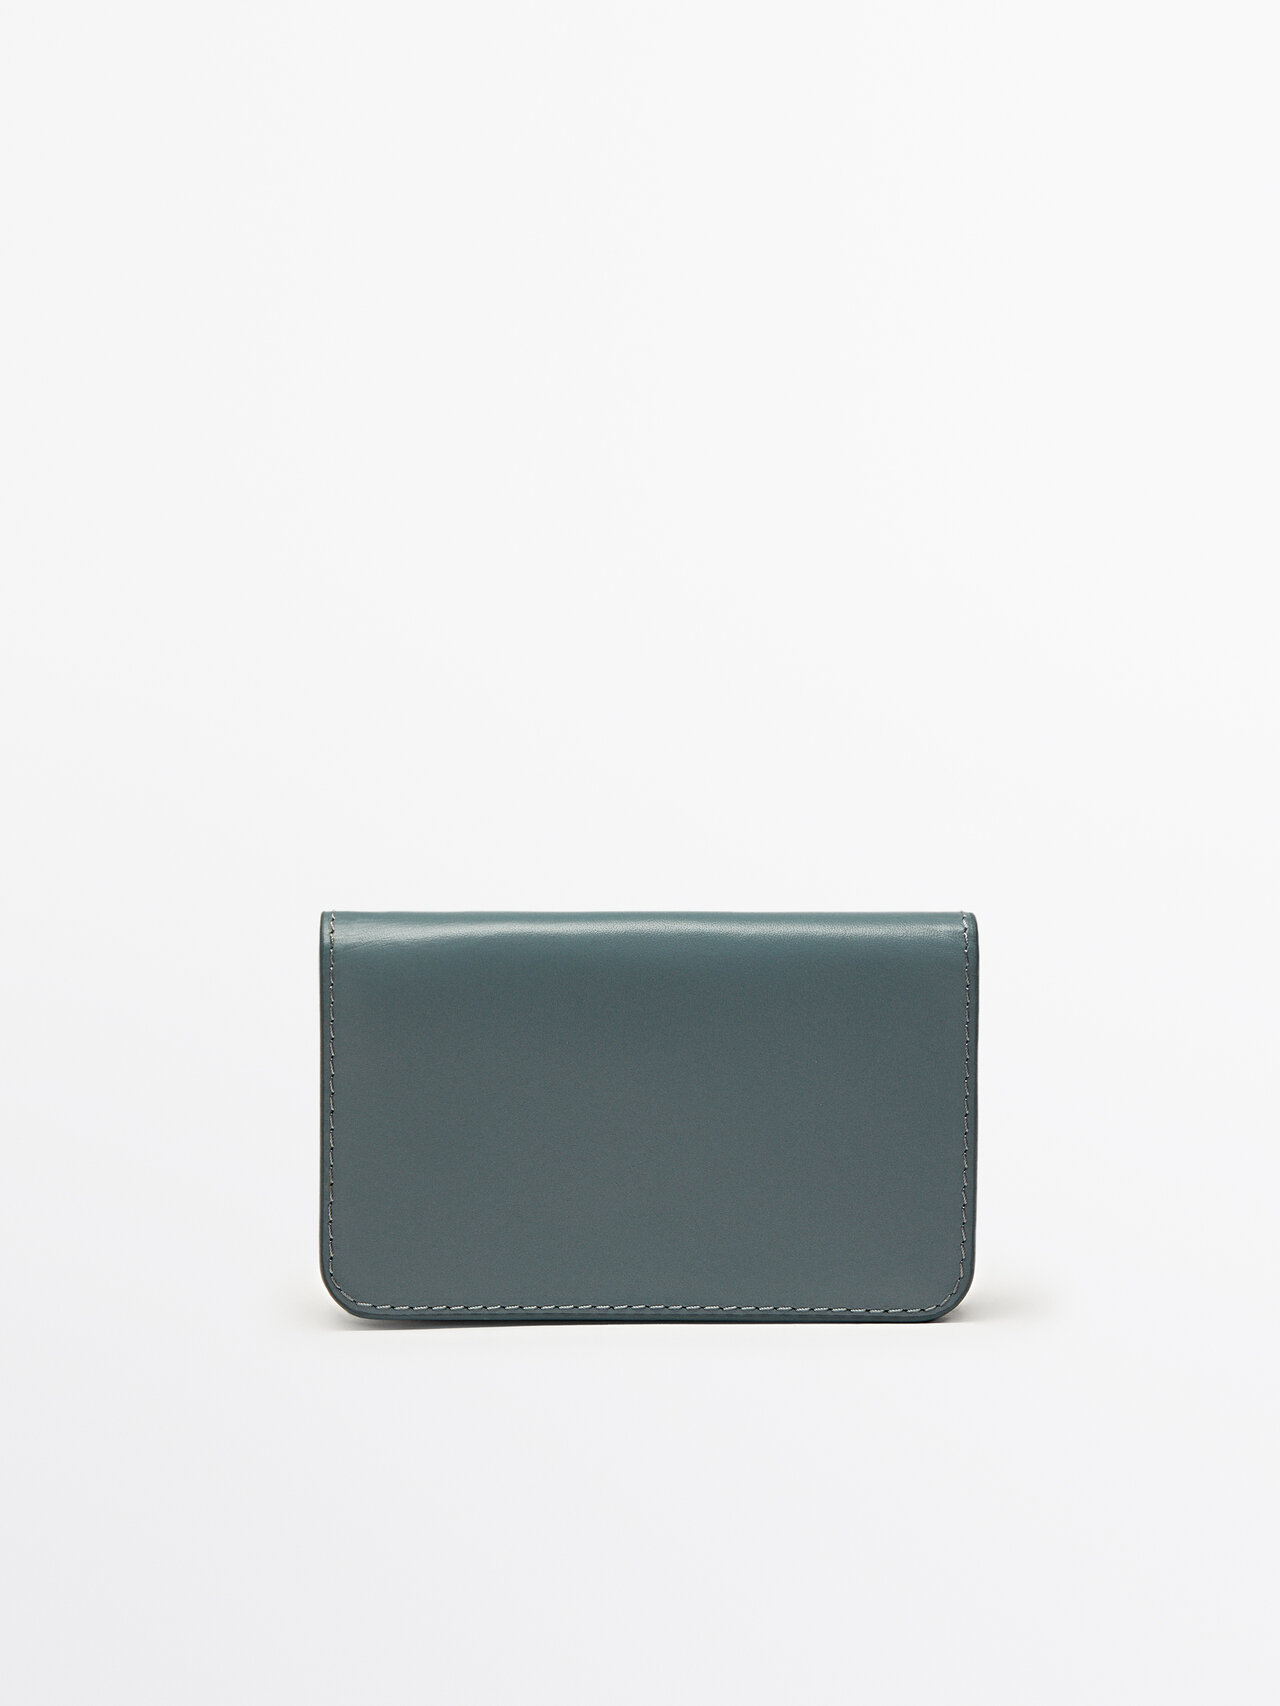 Massimo Dutti Leather Wallet In Light Blue